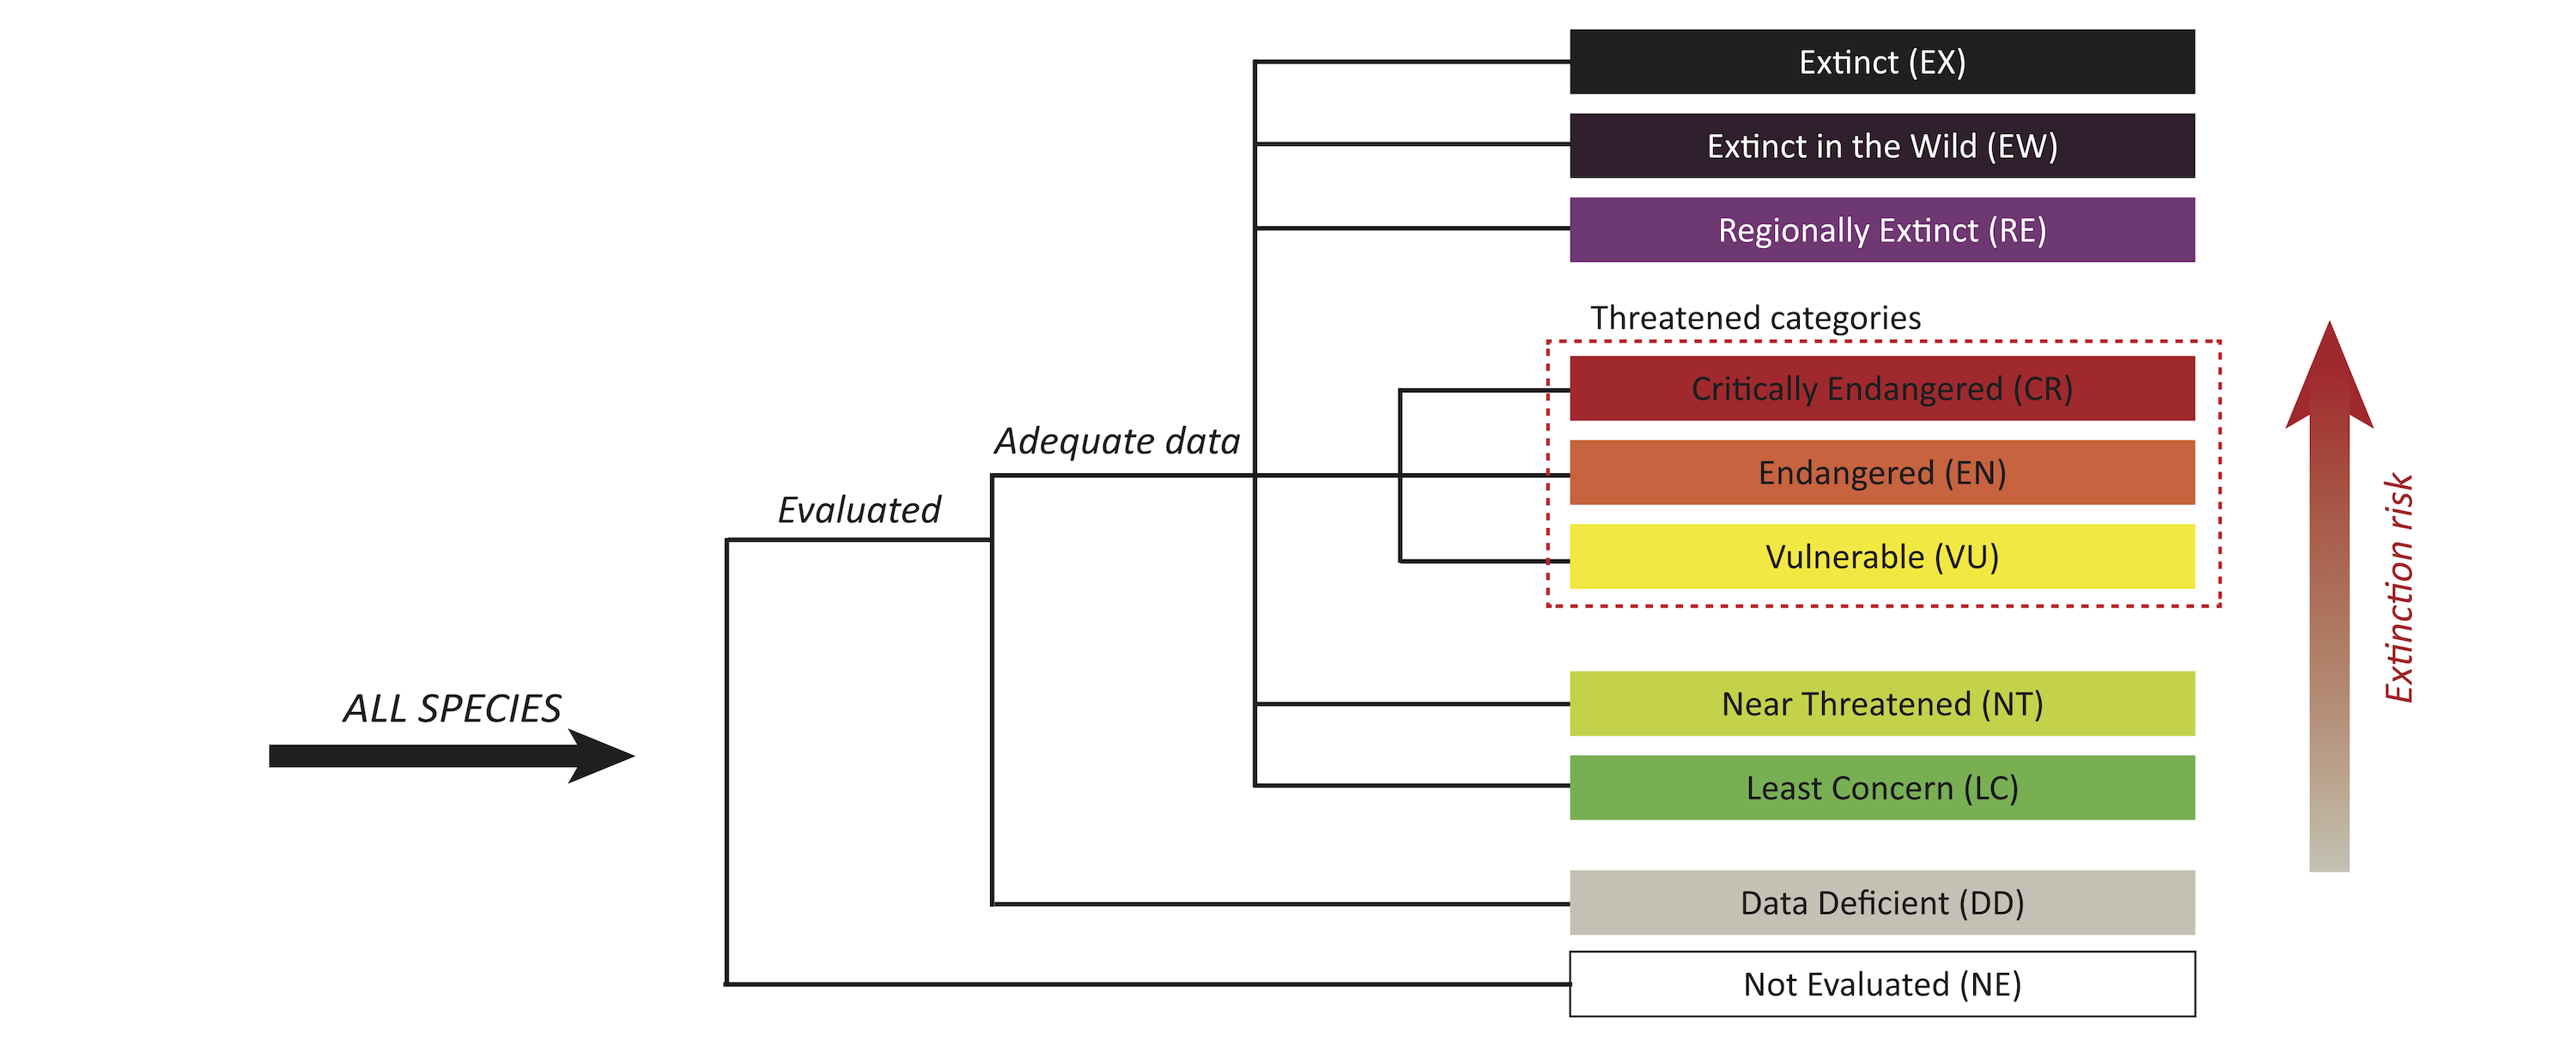 The categories of the IUCN redlist of endagered species.